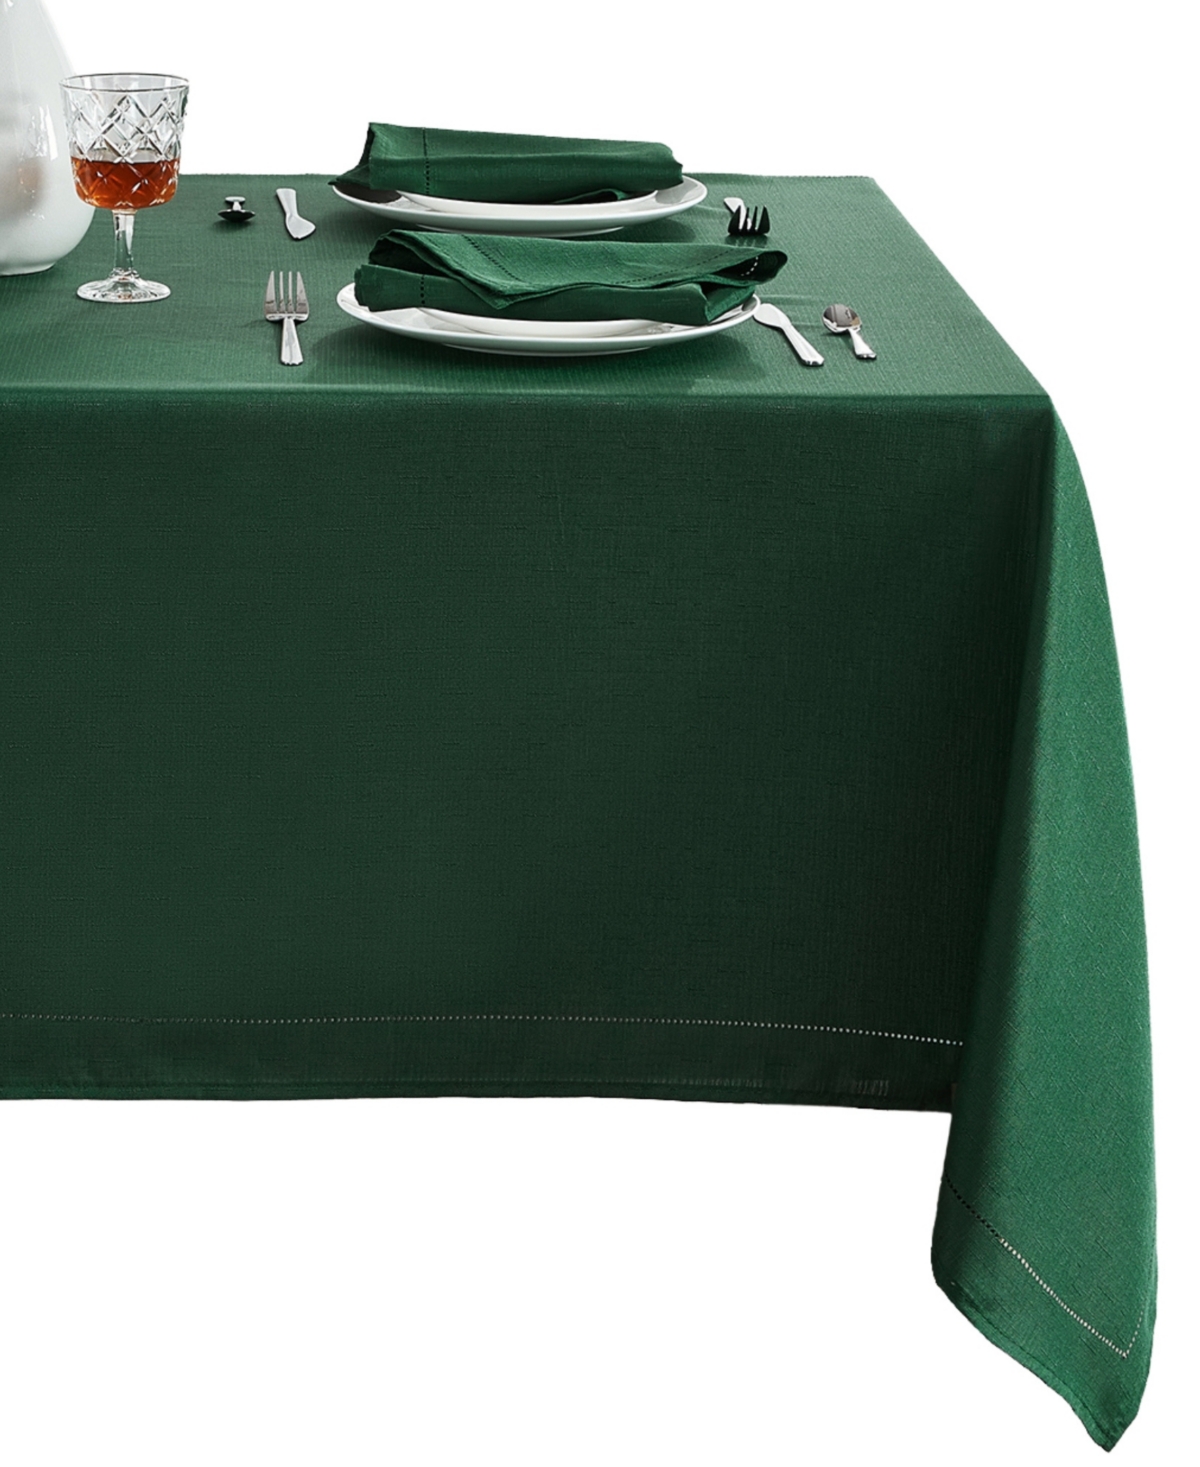 Elrene Alison Eyelet Punched Border Fabric Tablecloth, 52" X 70" In Forest